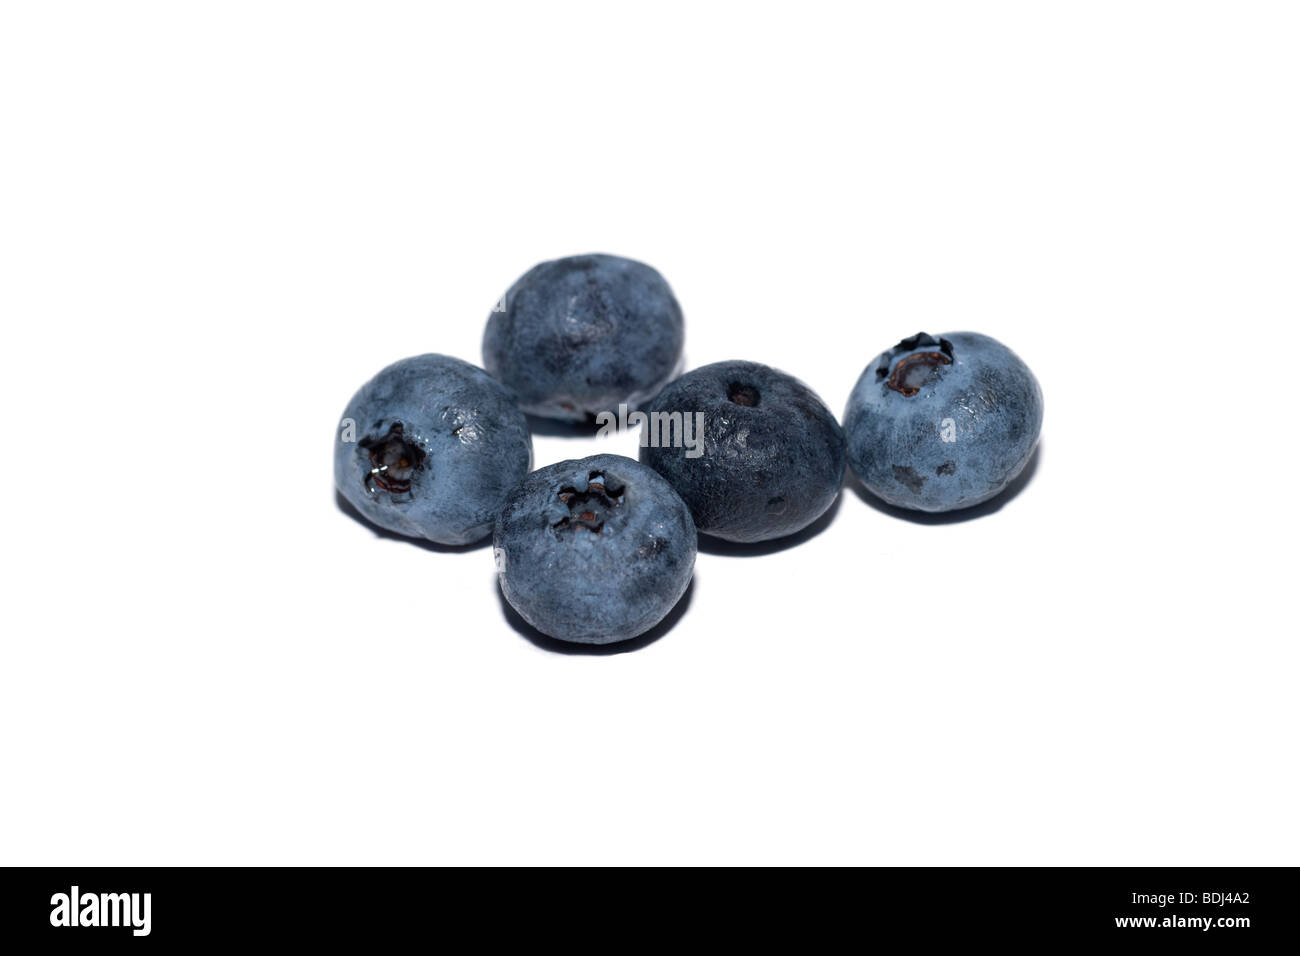 Small group of blueberries (Vaccinium myrtillus) on white background Stock Photo